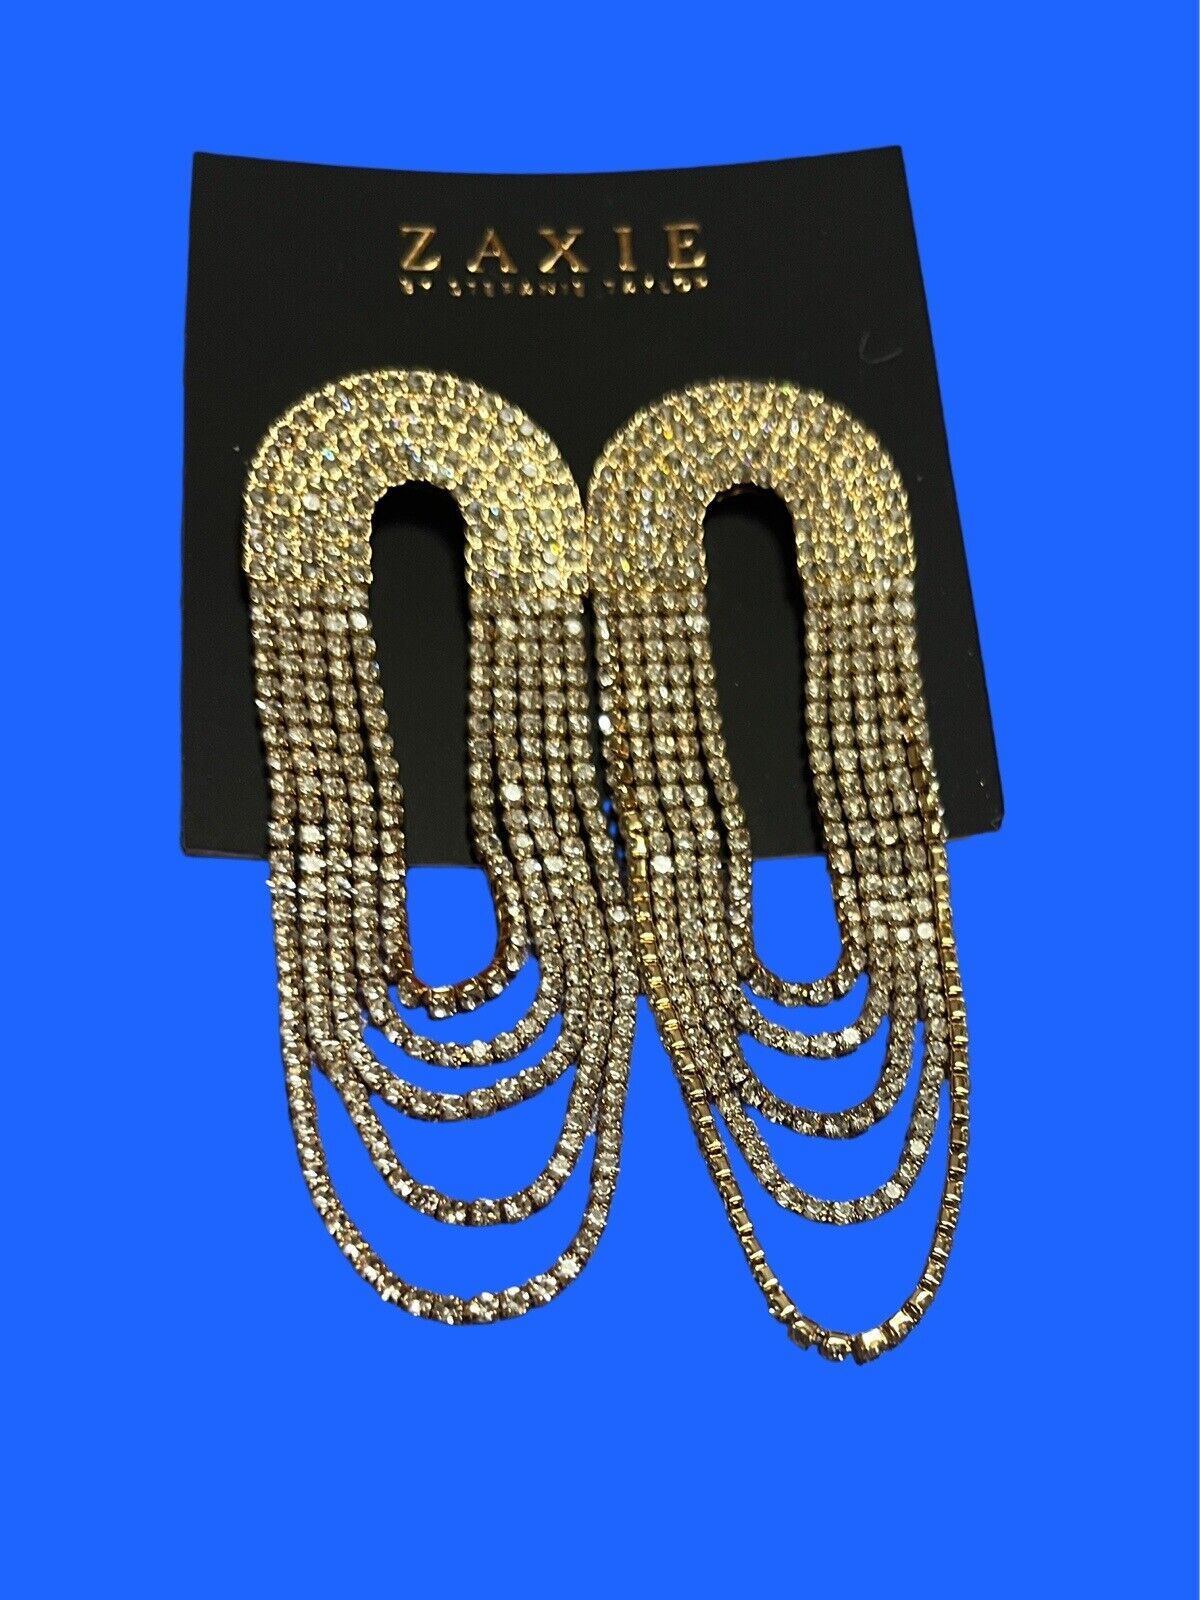 Zaxie by Stephanie Taylor Draped Crystal Chandelier Earrings in Gold NWT - $24.74